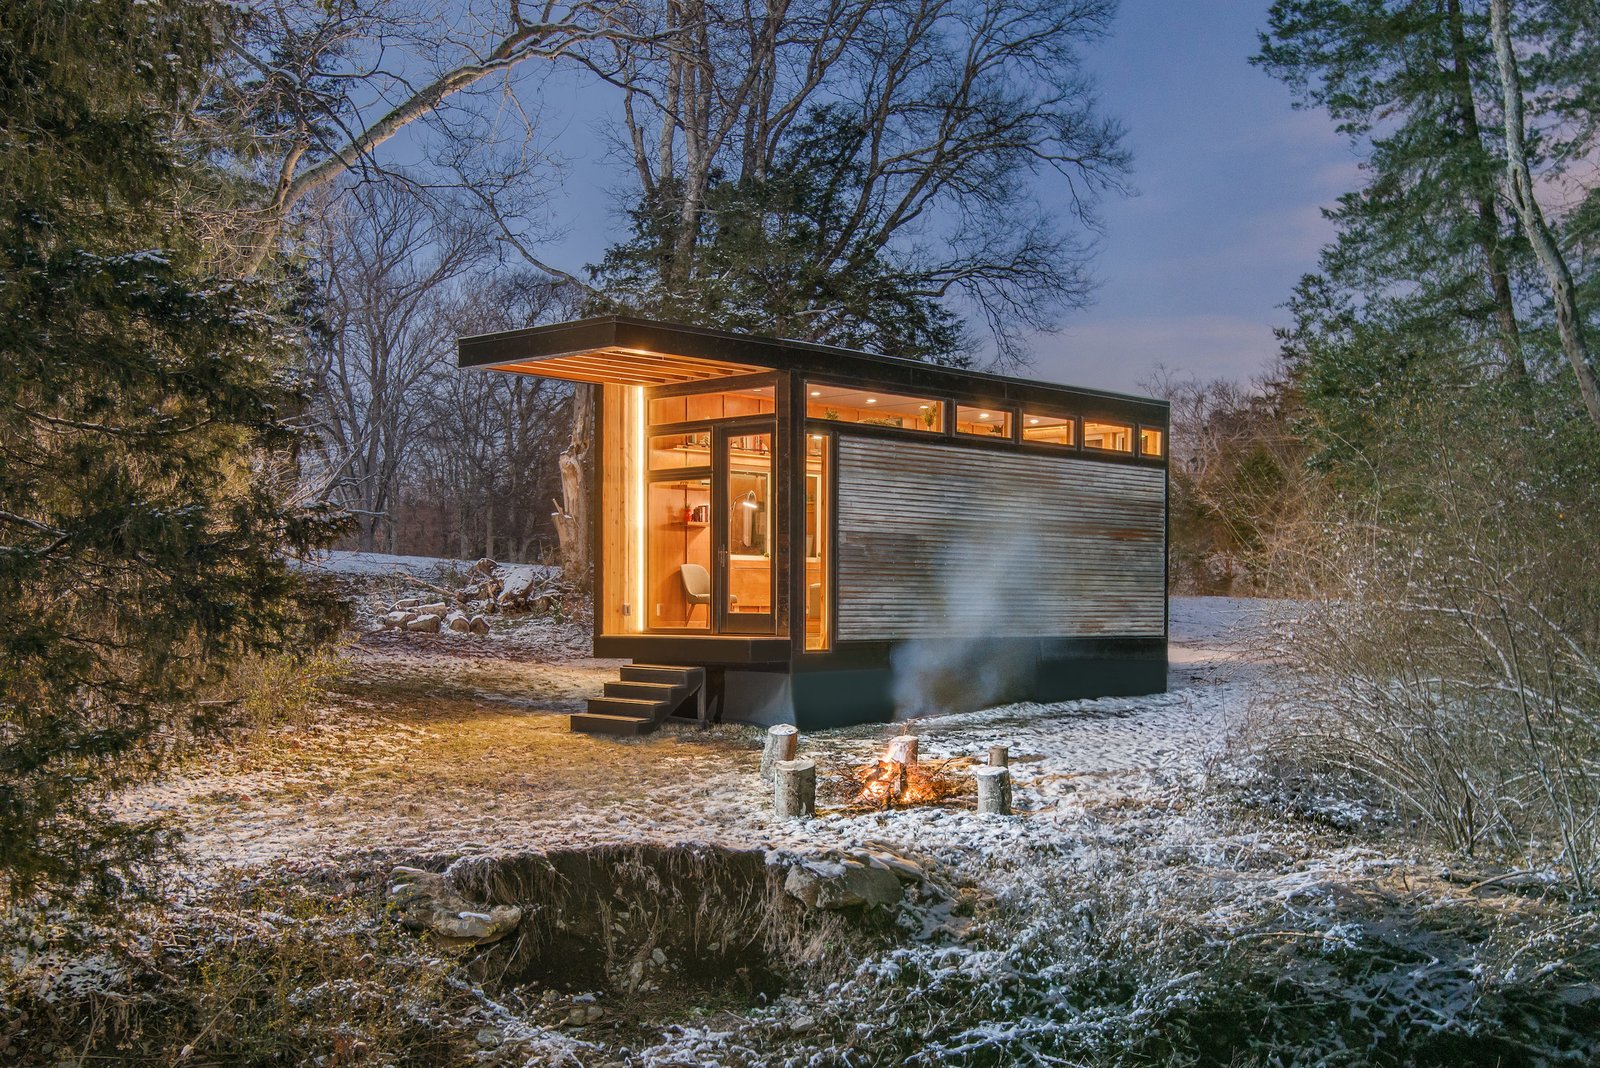 This Tiny Home and Writing Studio Was Invented for a Children’s Author